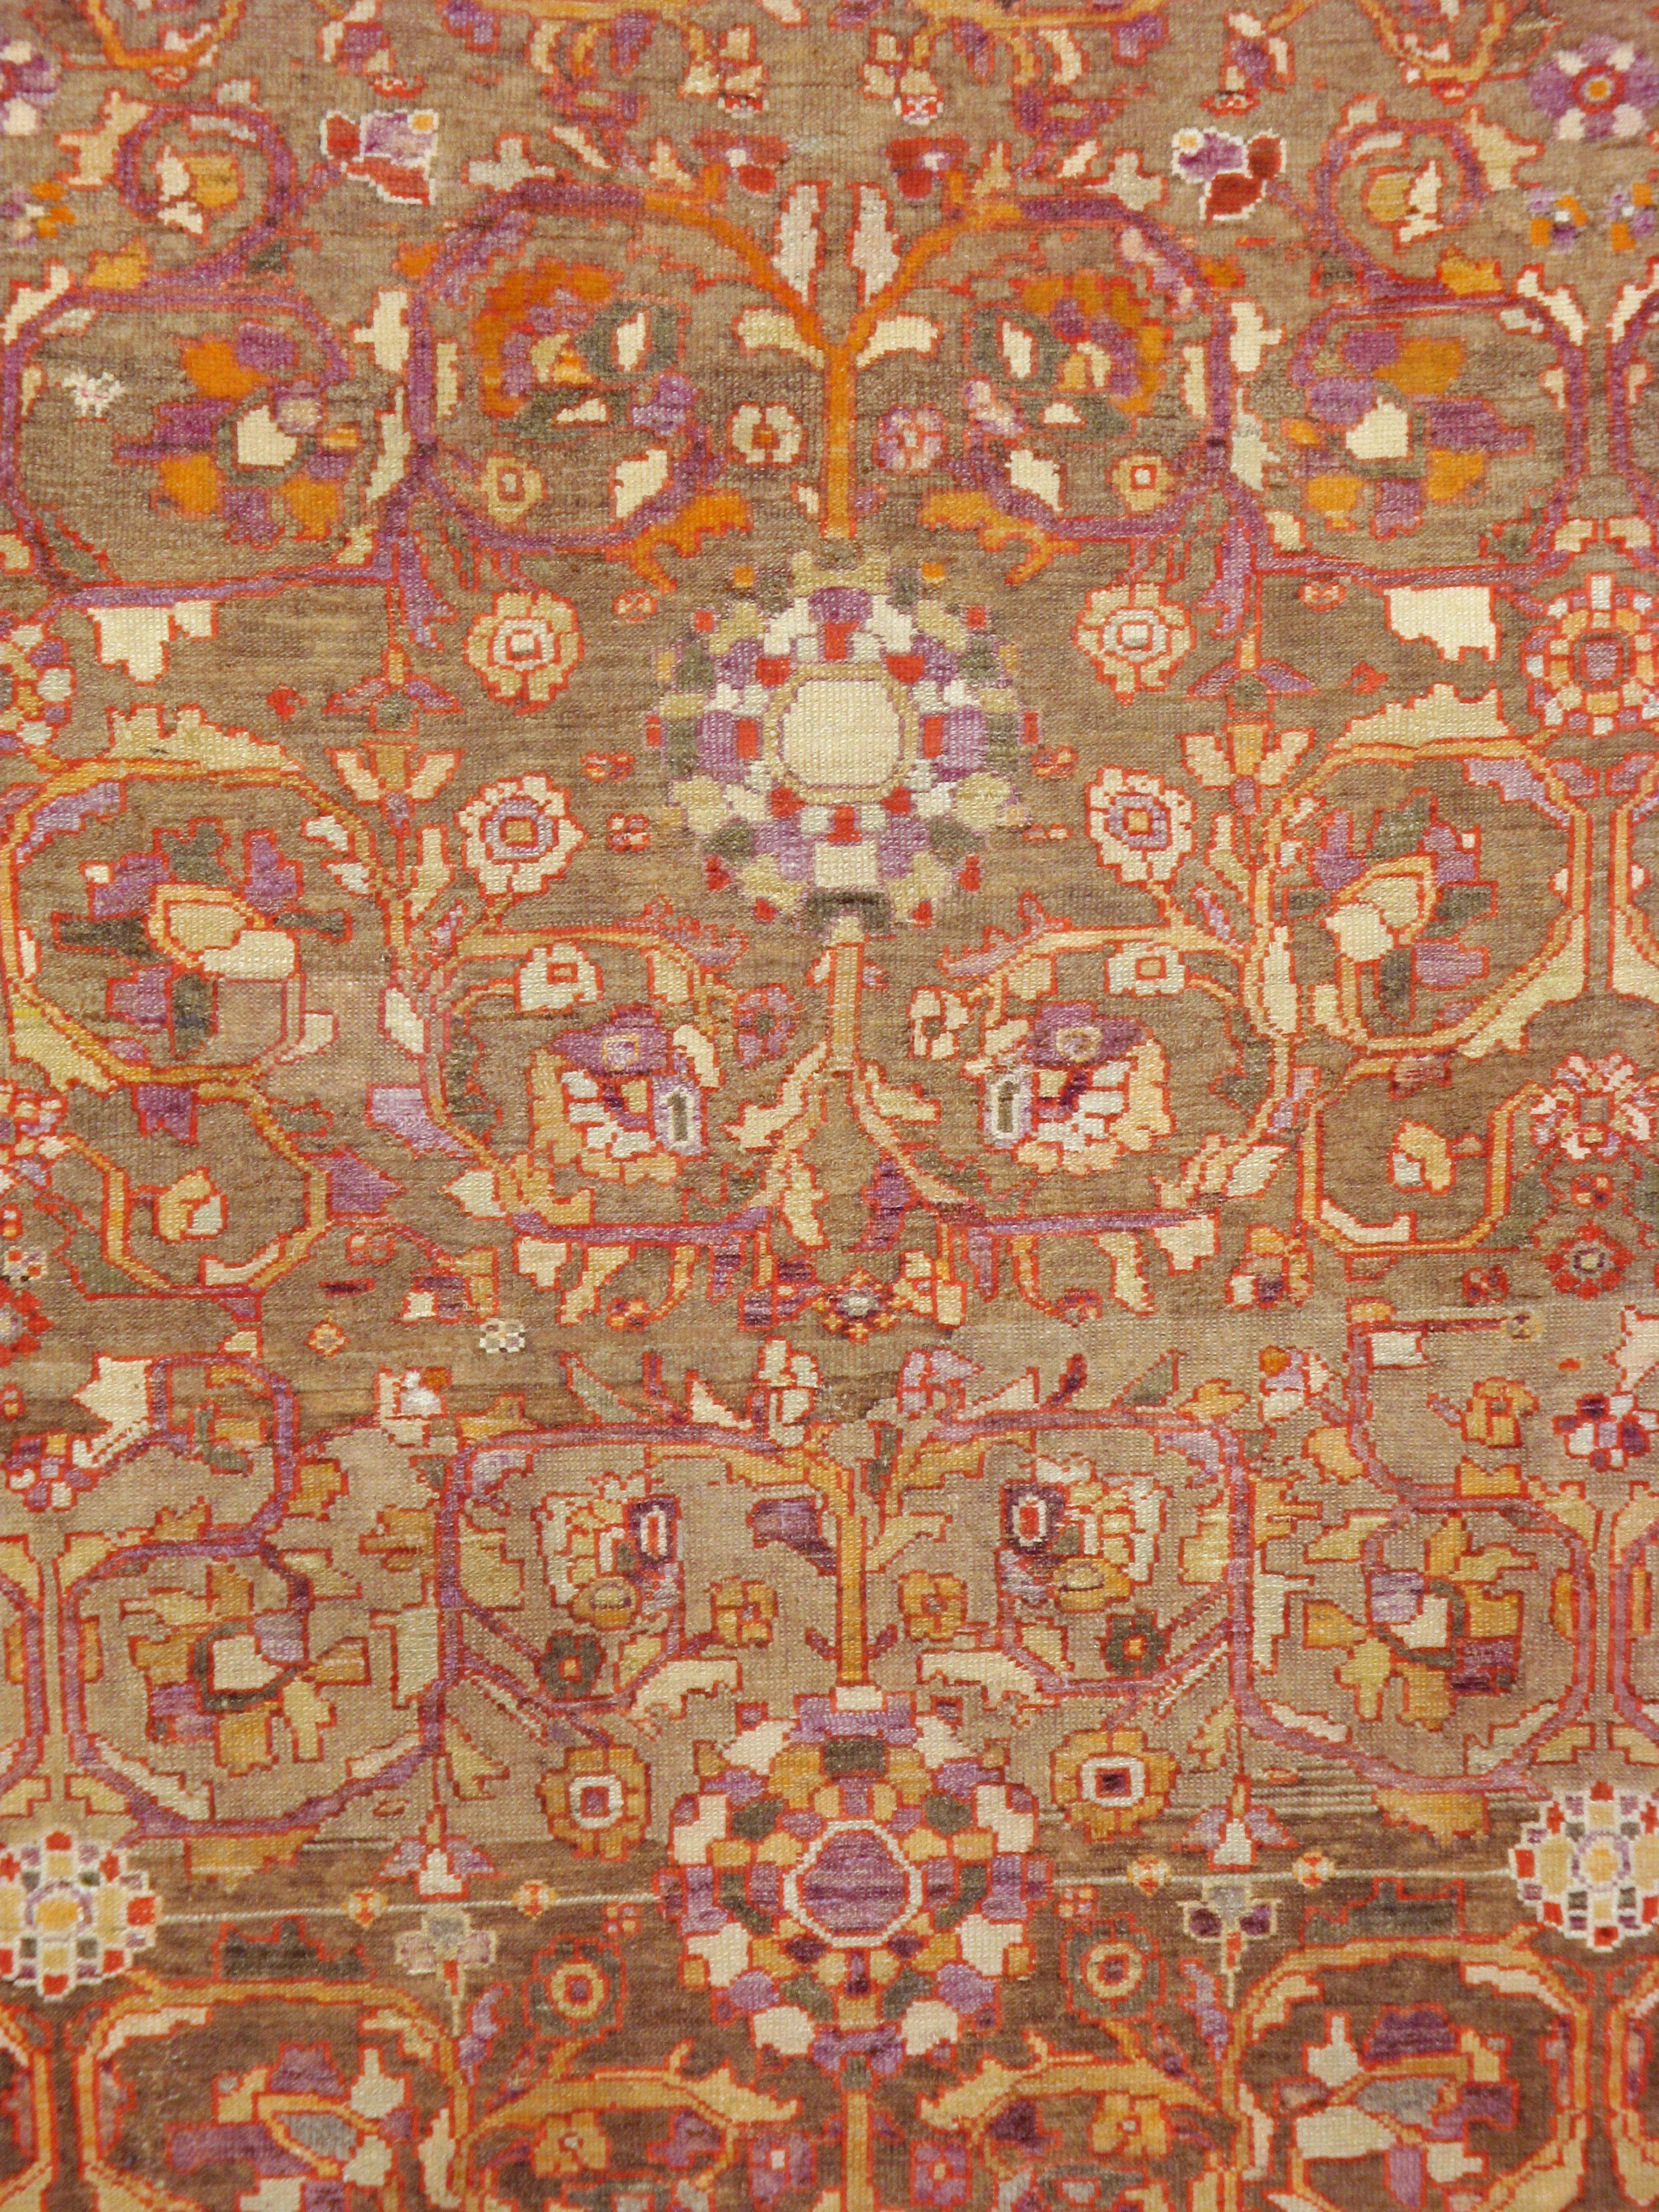 An antique Persian Malayer carpet from the early 20th century. Bichrome palmettes along the central axis of the medium brown field of this Hamadan area town rug are flanked by doubled serrated and curved leaves. An old ivory border of diamond shapes